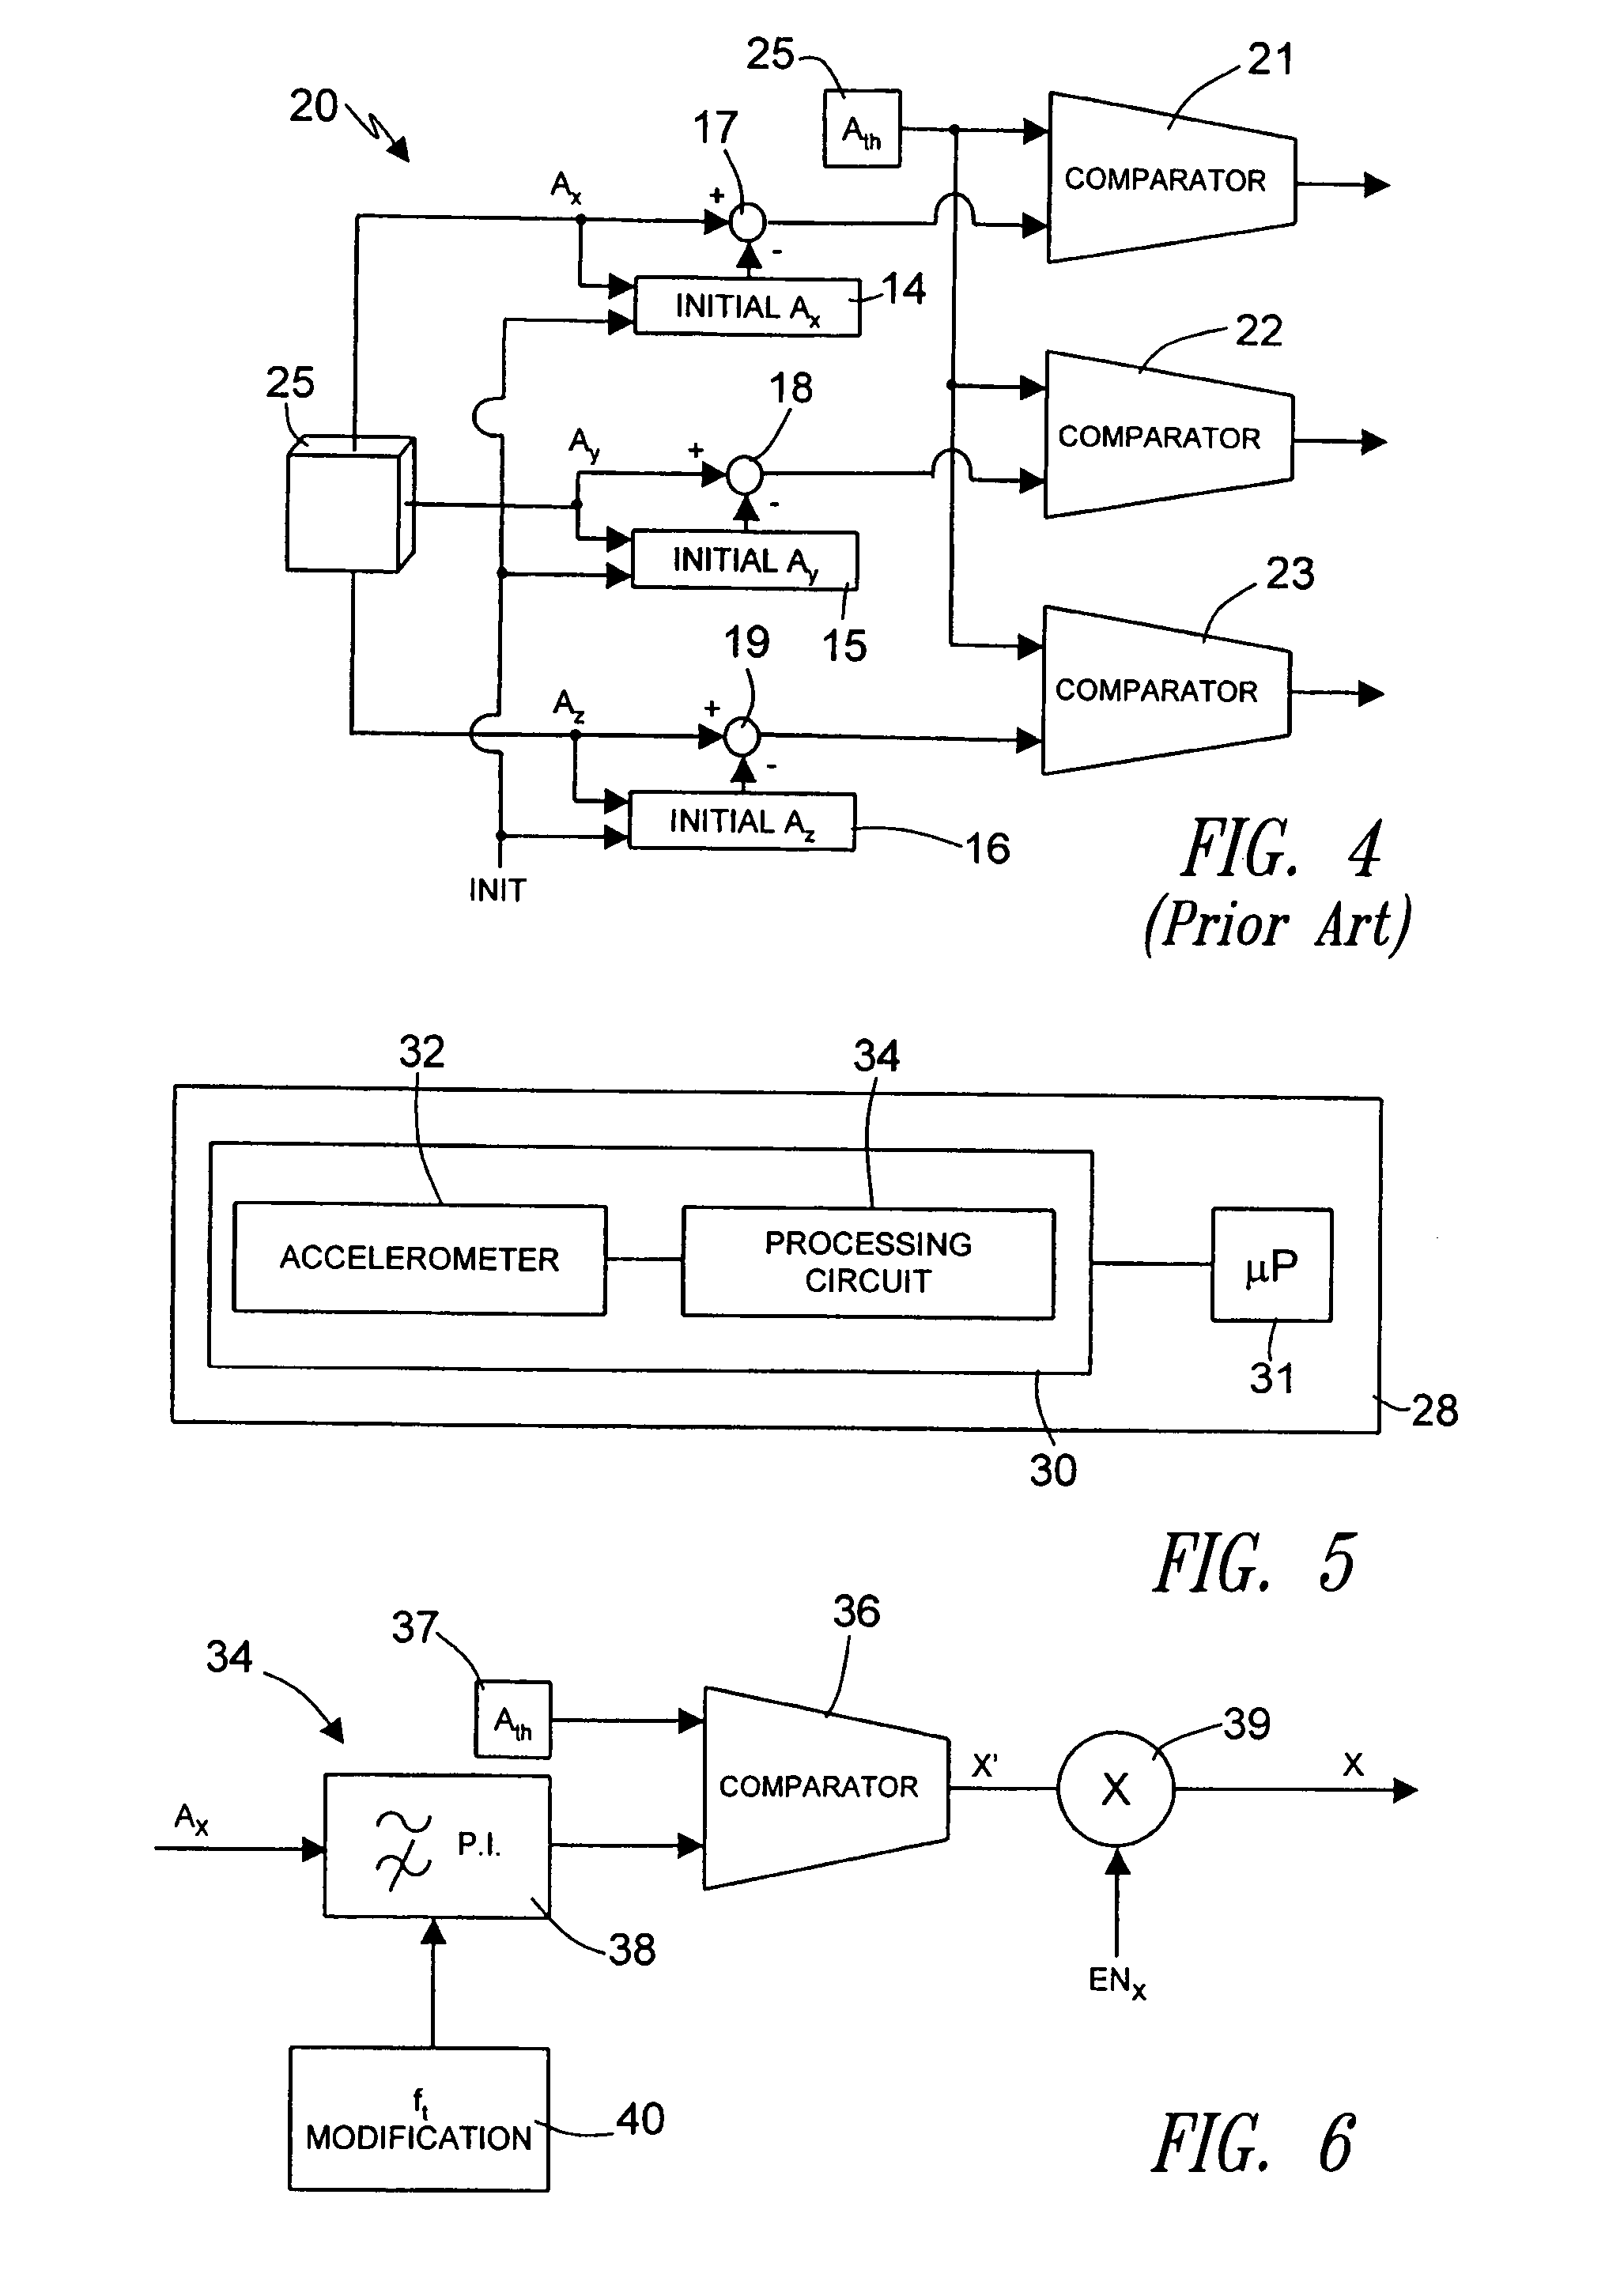 Displacement detection device for a portable apparatus